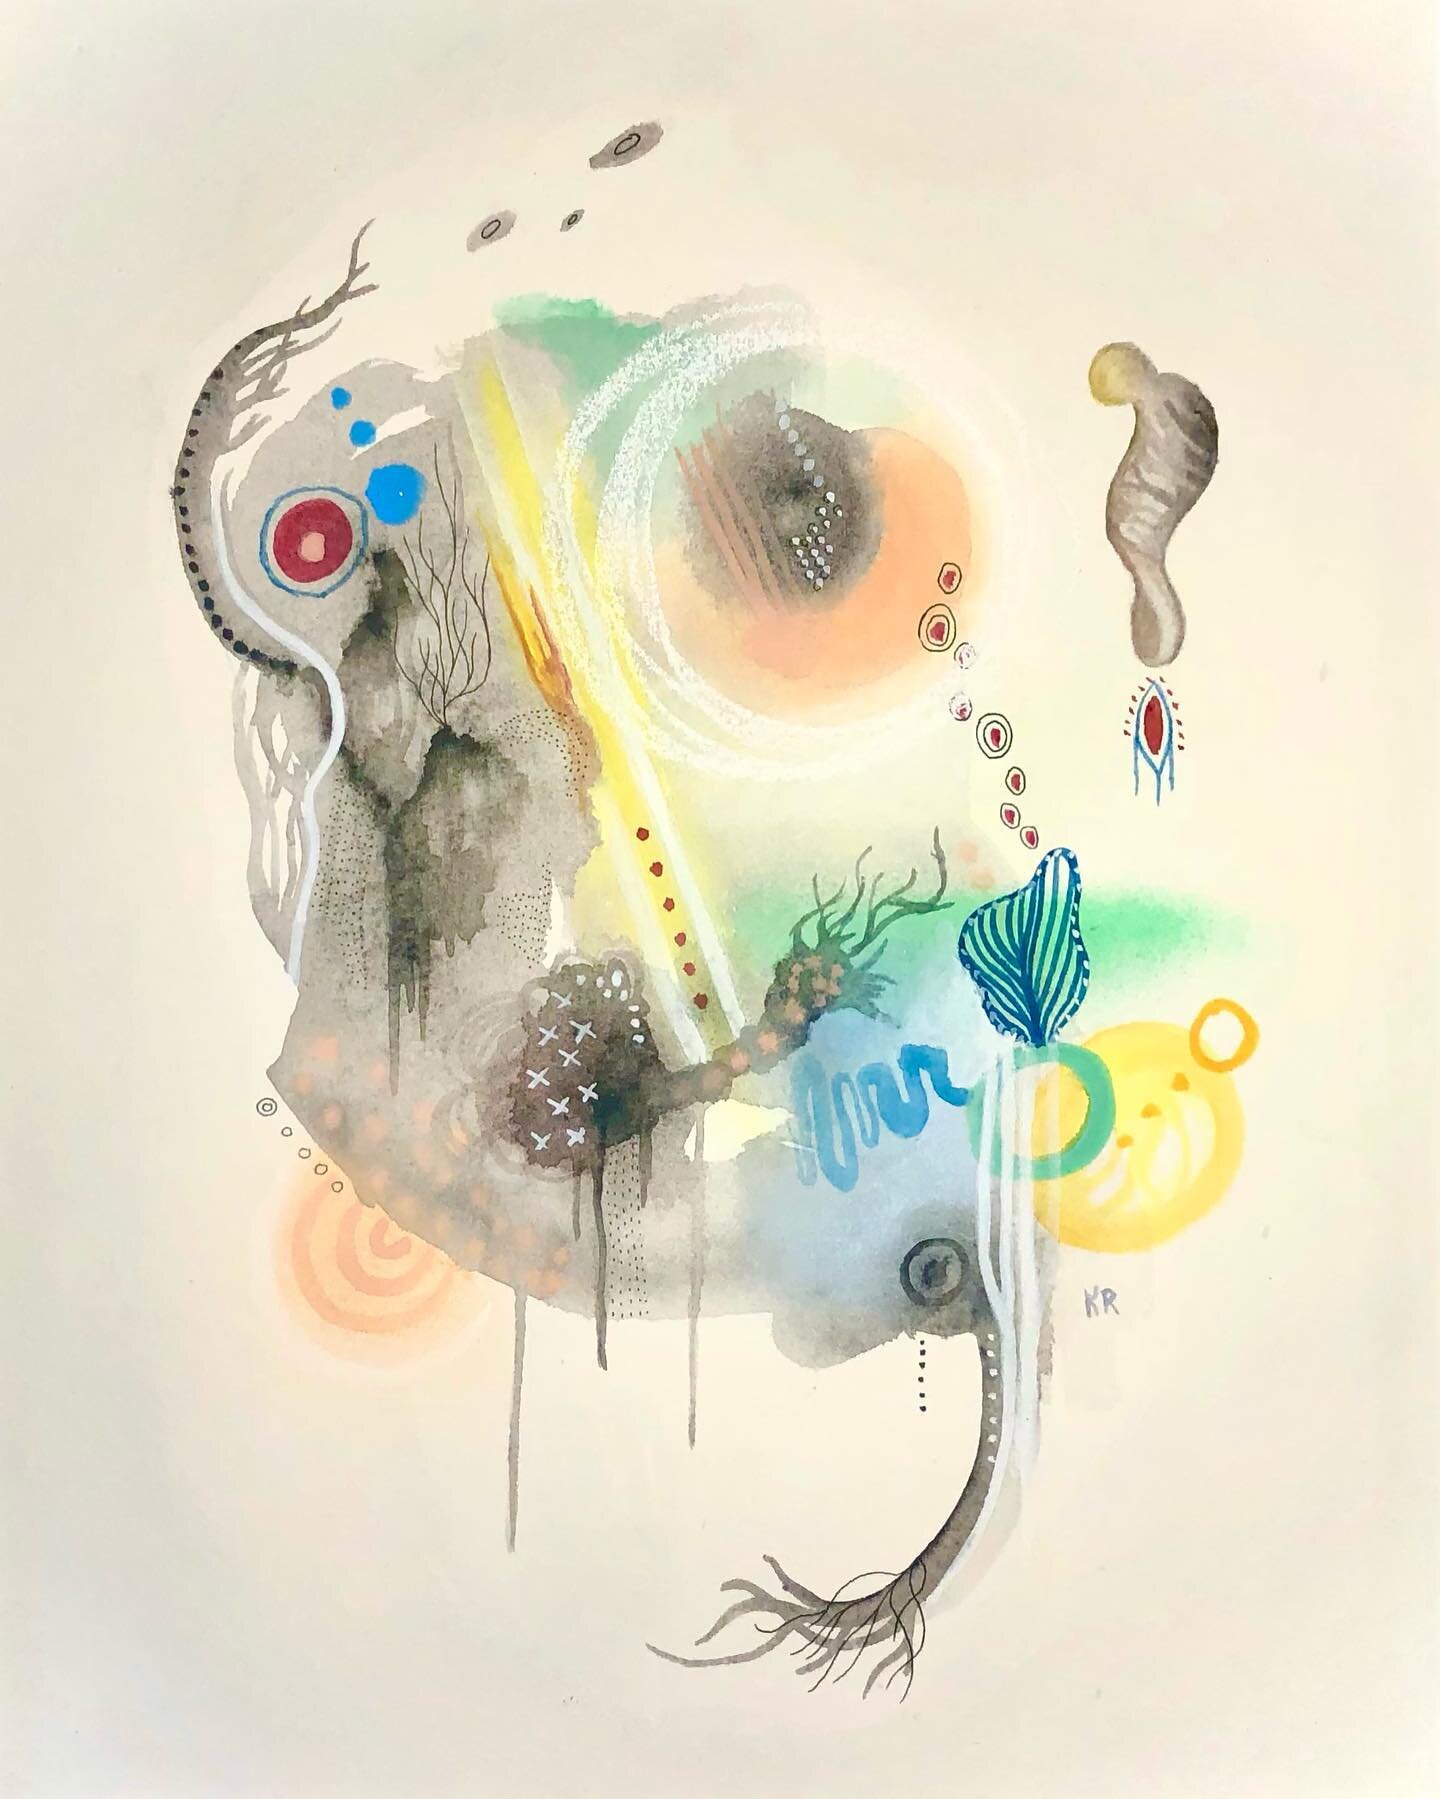 The bidding is on! Make sure to check out and bid on my piece &lsquo;Impulse&rsquo;. 

Your support will help Fight Hunger With Art. For every dollar you bid, 4 meals will go to a family in Eastern Wisconsin.

https://cbo.io/bidapp/index.php?slug=fae